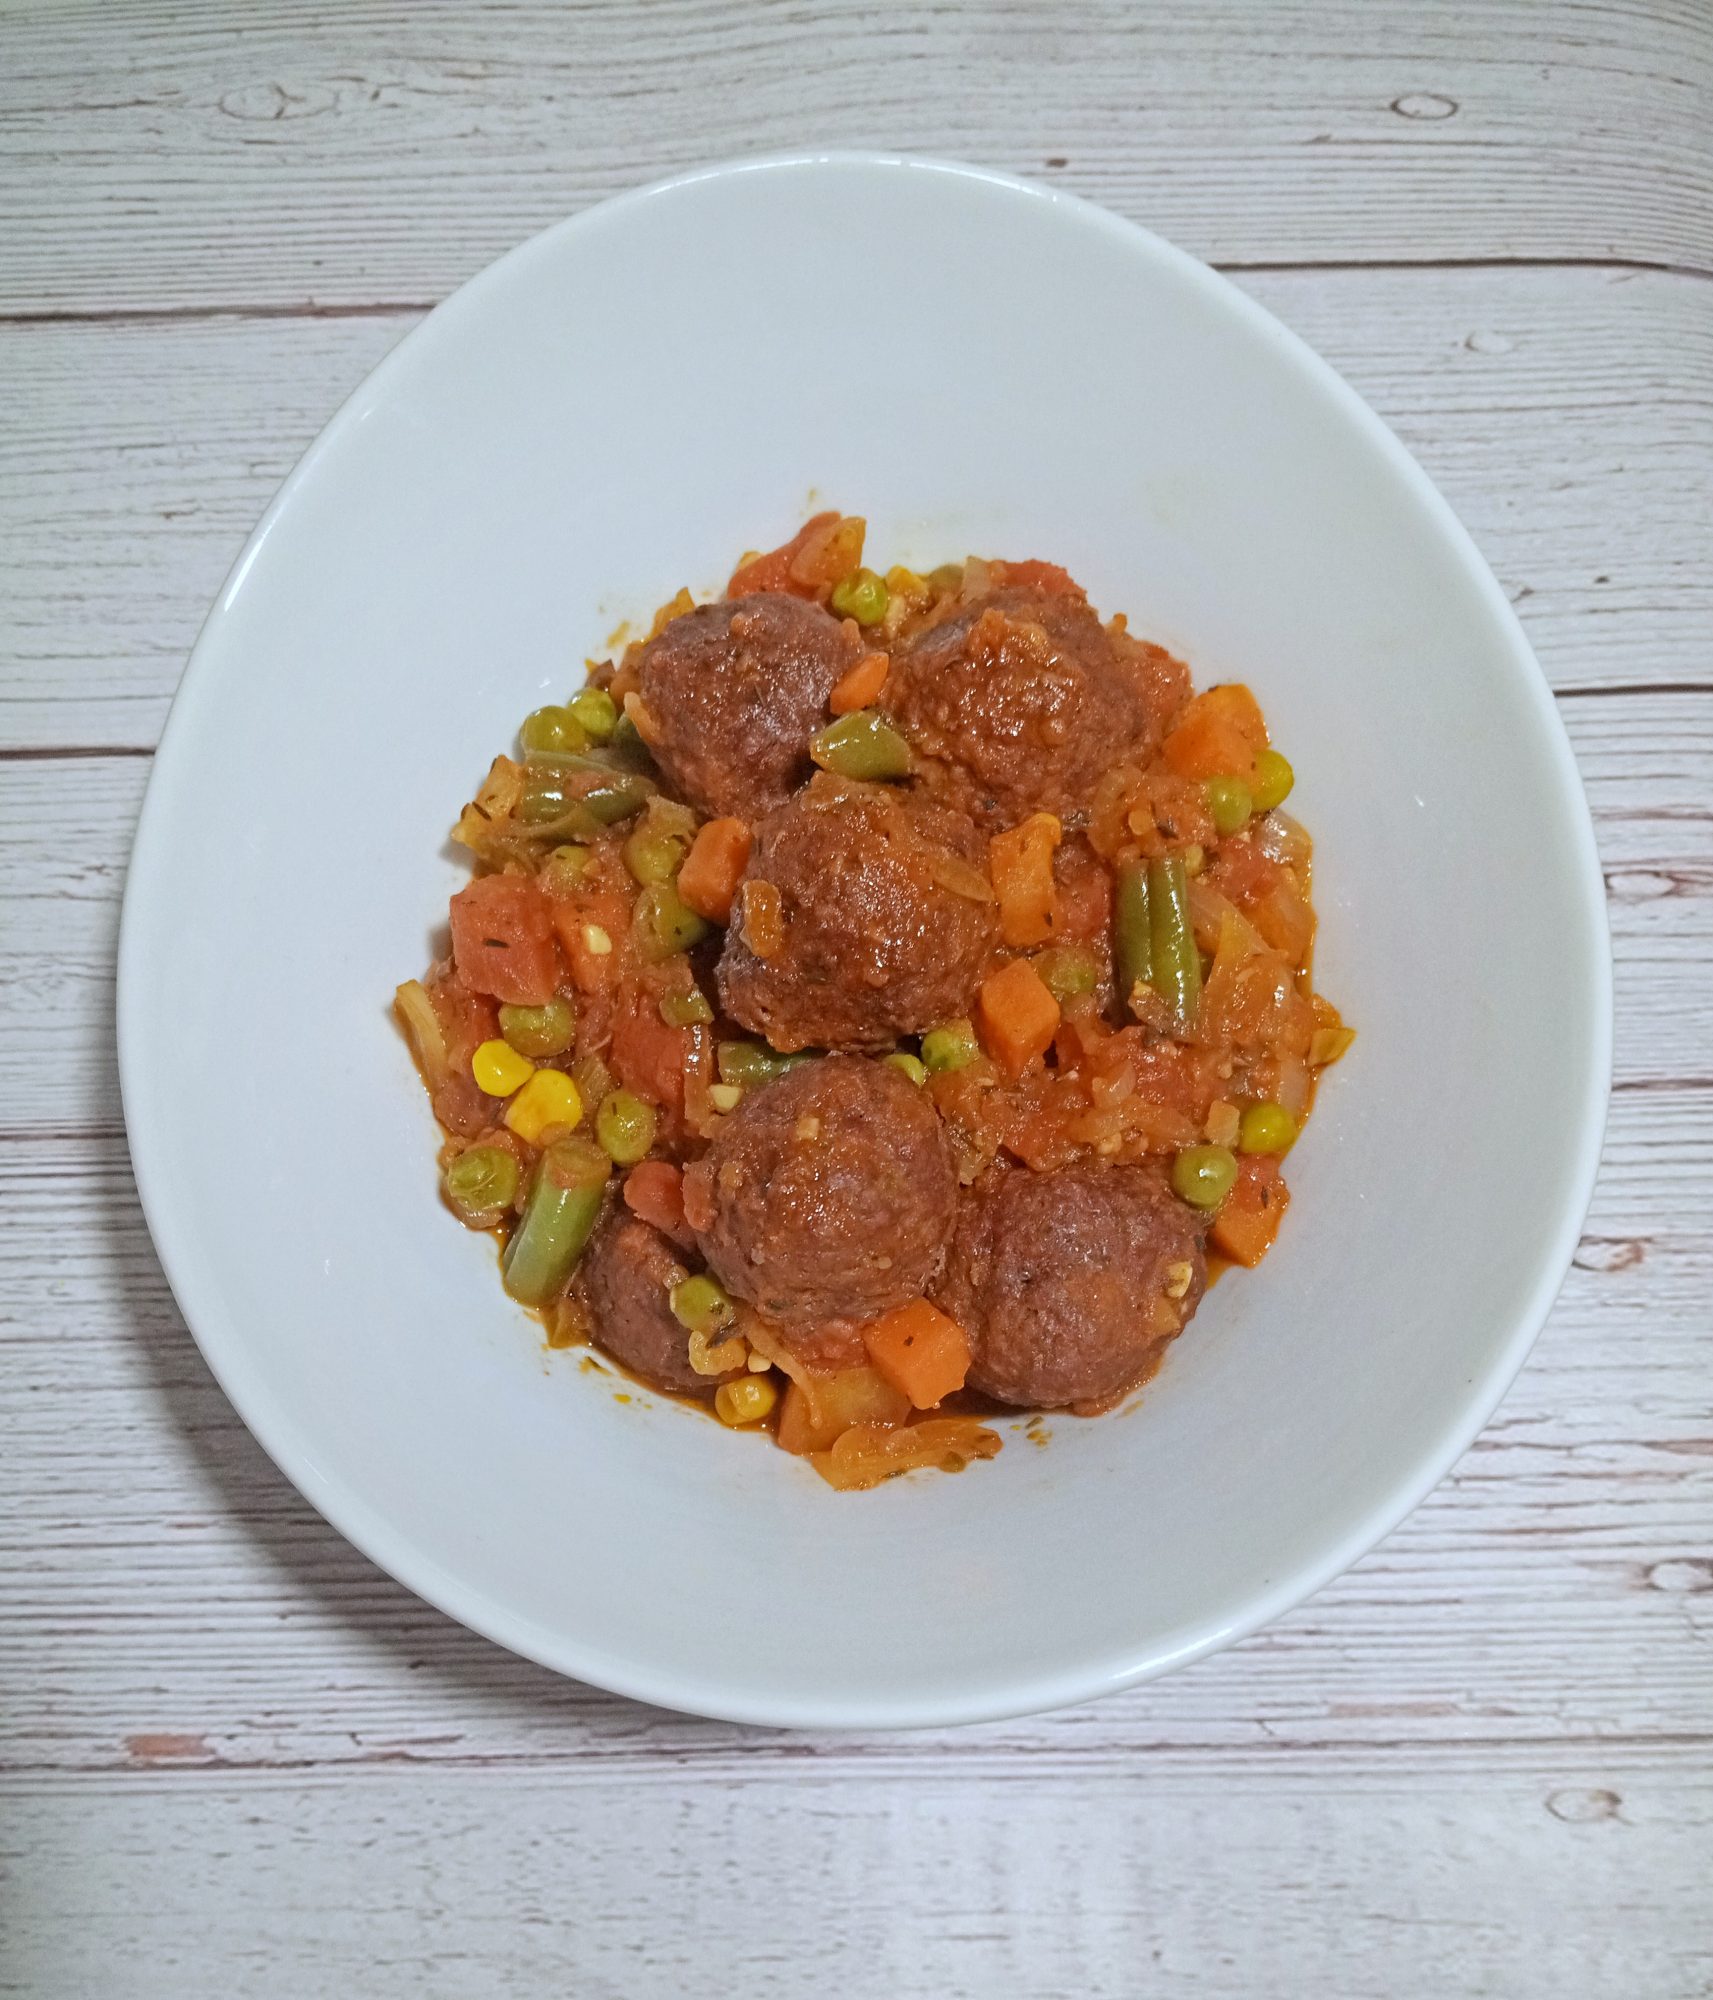 Meatless Meatballs with Vegetable Sauce